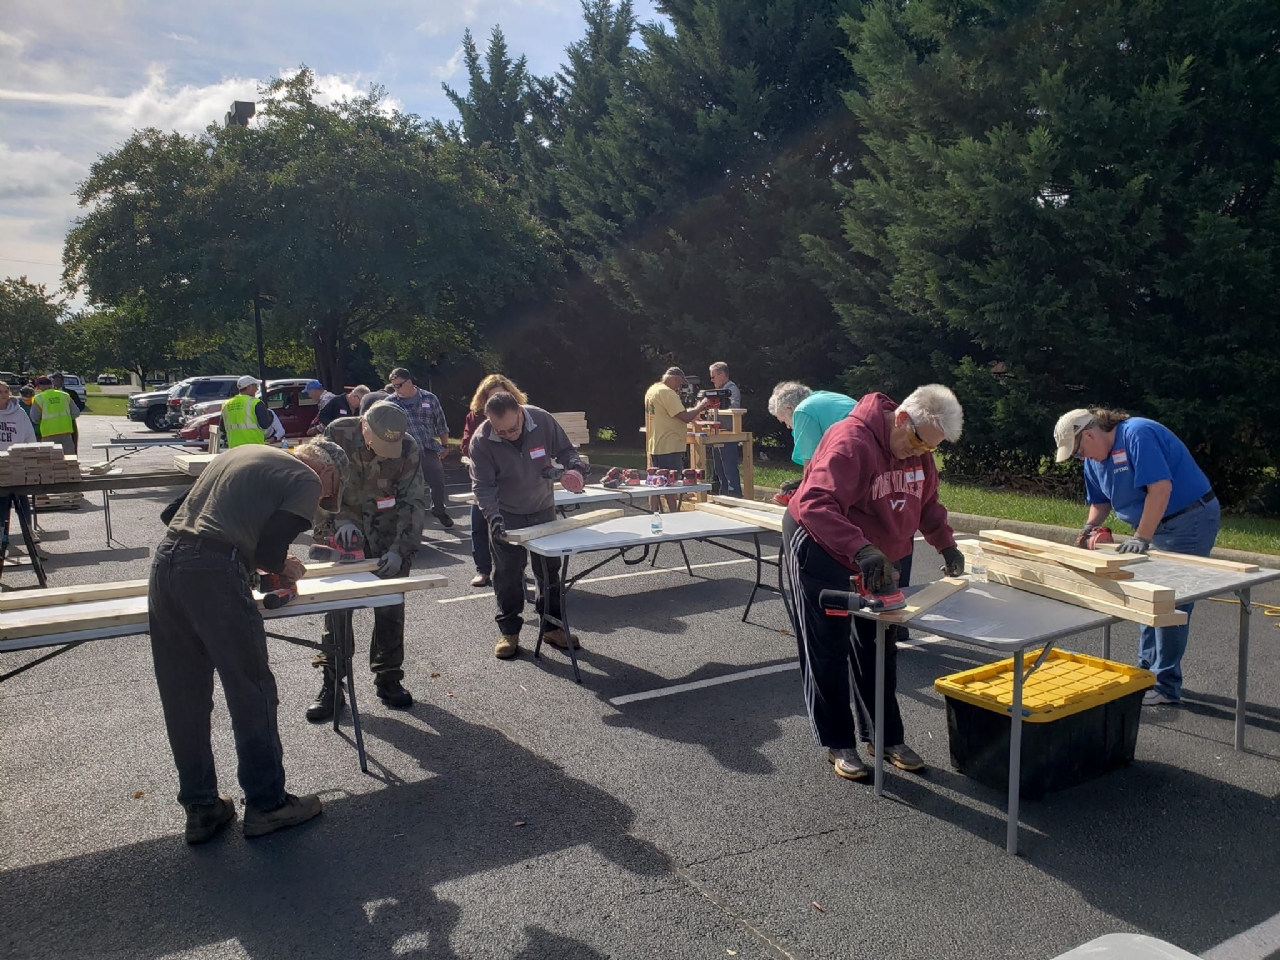 VFW Post 1264. Post 1264 Auxiliary and Volunteers were Pleased to Partner with Sleep with Heavenly Peace making 30 plus beds for children.  This is a Good example of how this Post helps with the local Community.  Over 39 Volunteers,  the Post providing all supplies.